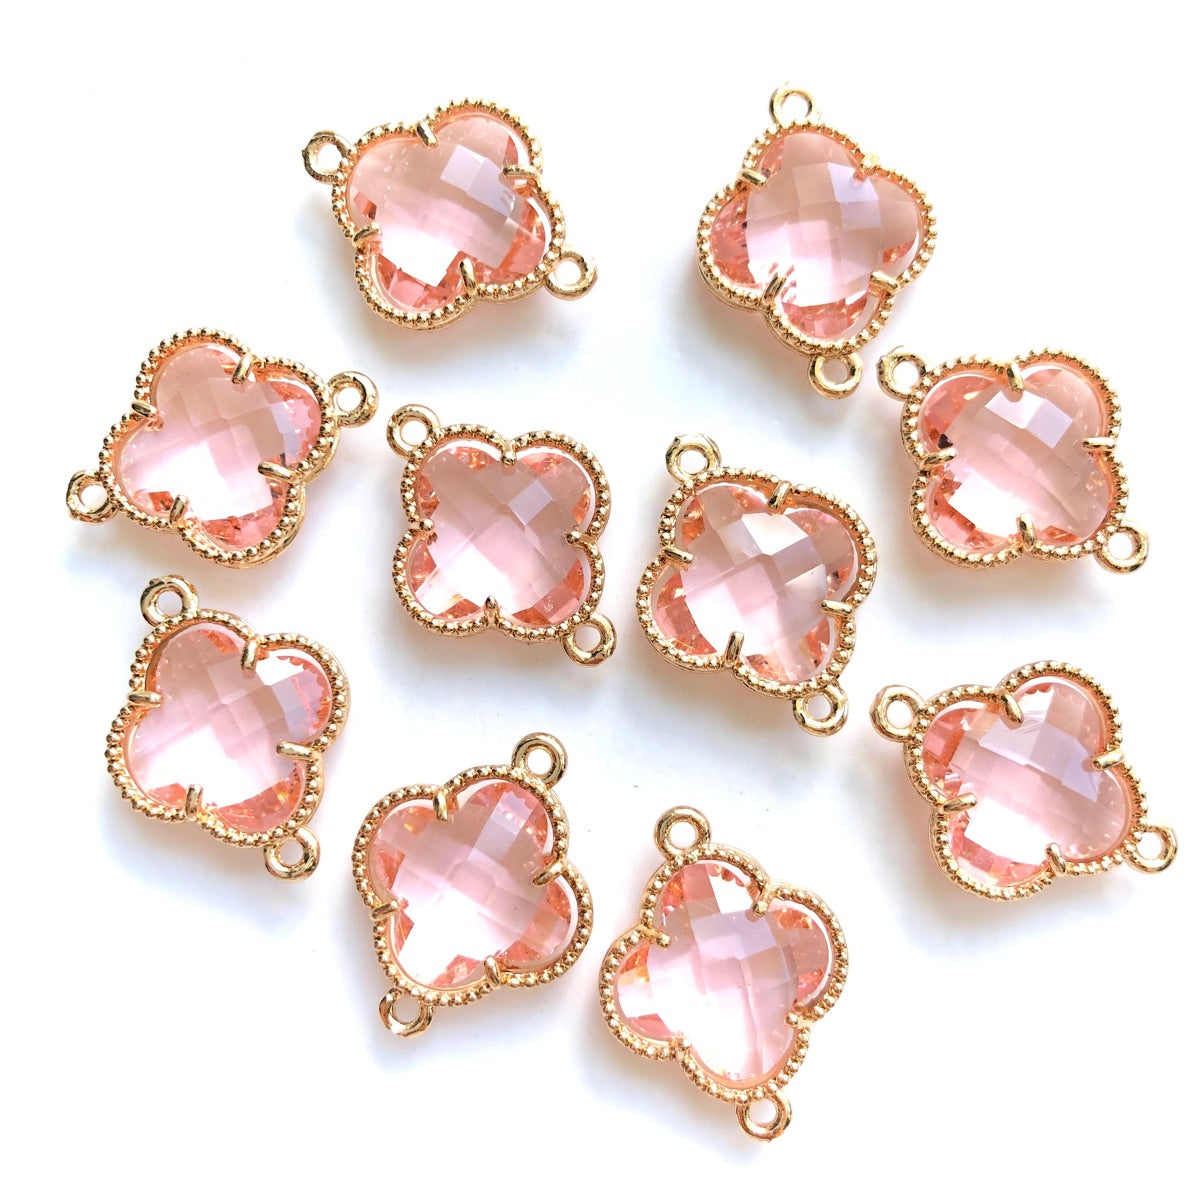 10pcs/Lot Gold Plated Glass Crystal Clover Flower Connectors Rose Pink Stone Charms Flower Glass Beads New Charms Arrivals Charms Beads Beyond